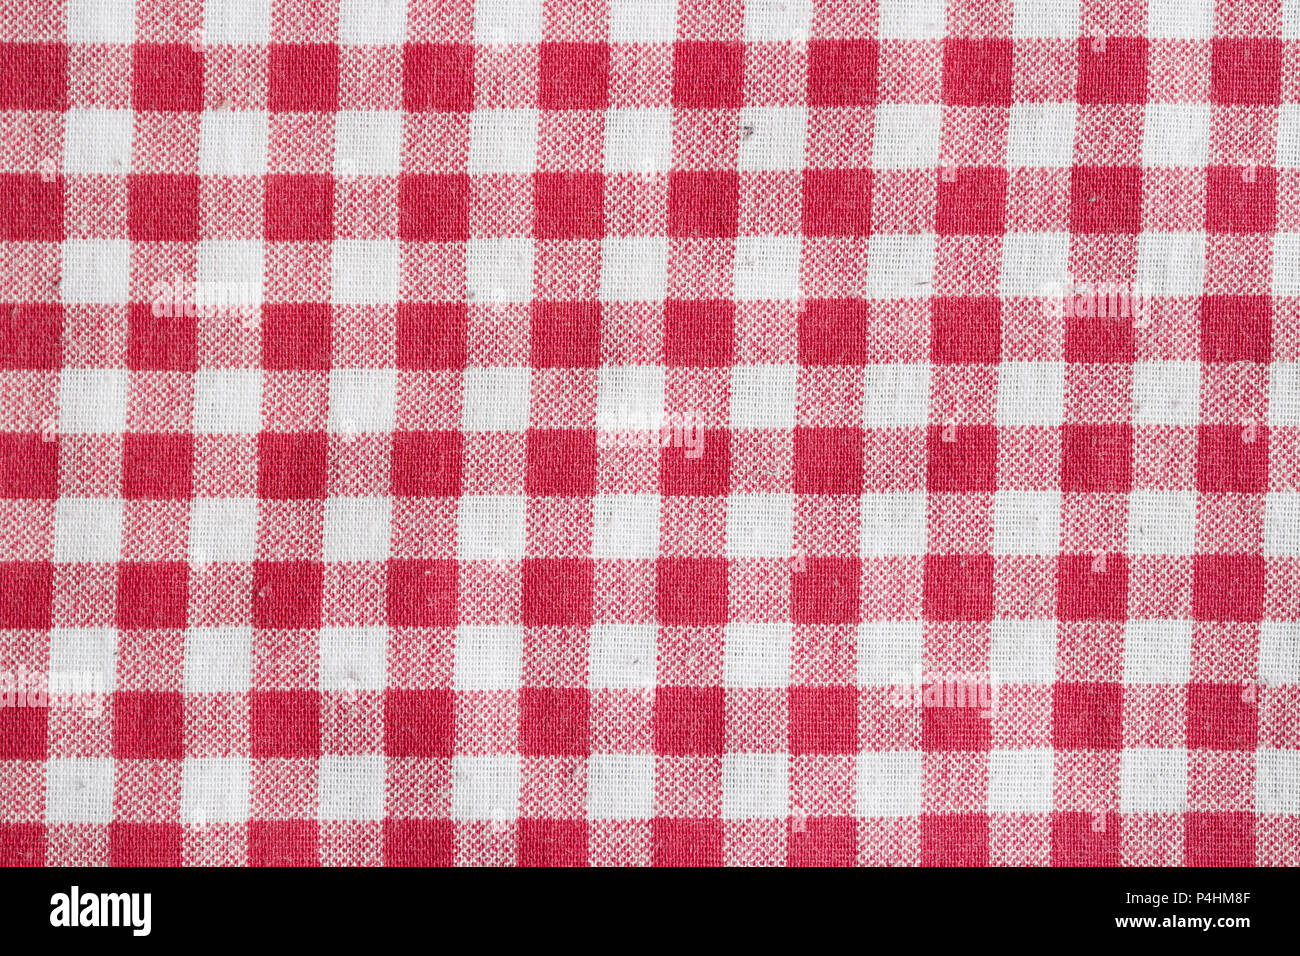 Red and white checkered fabric texture. Red picnic tablecloth background. Stock Photo